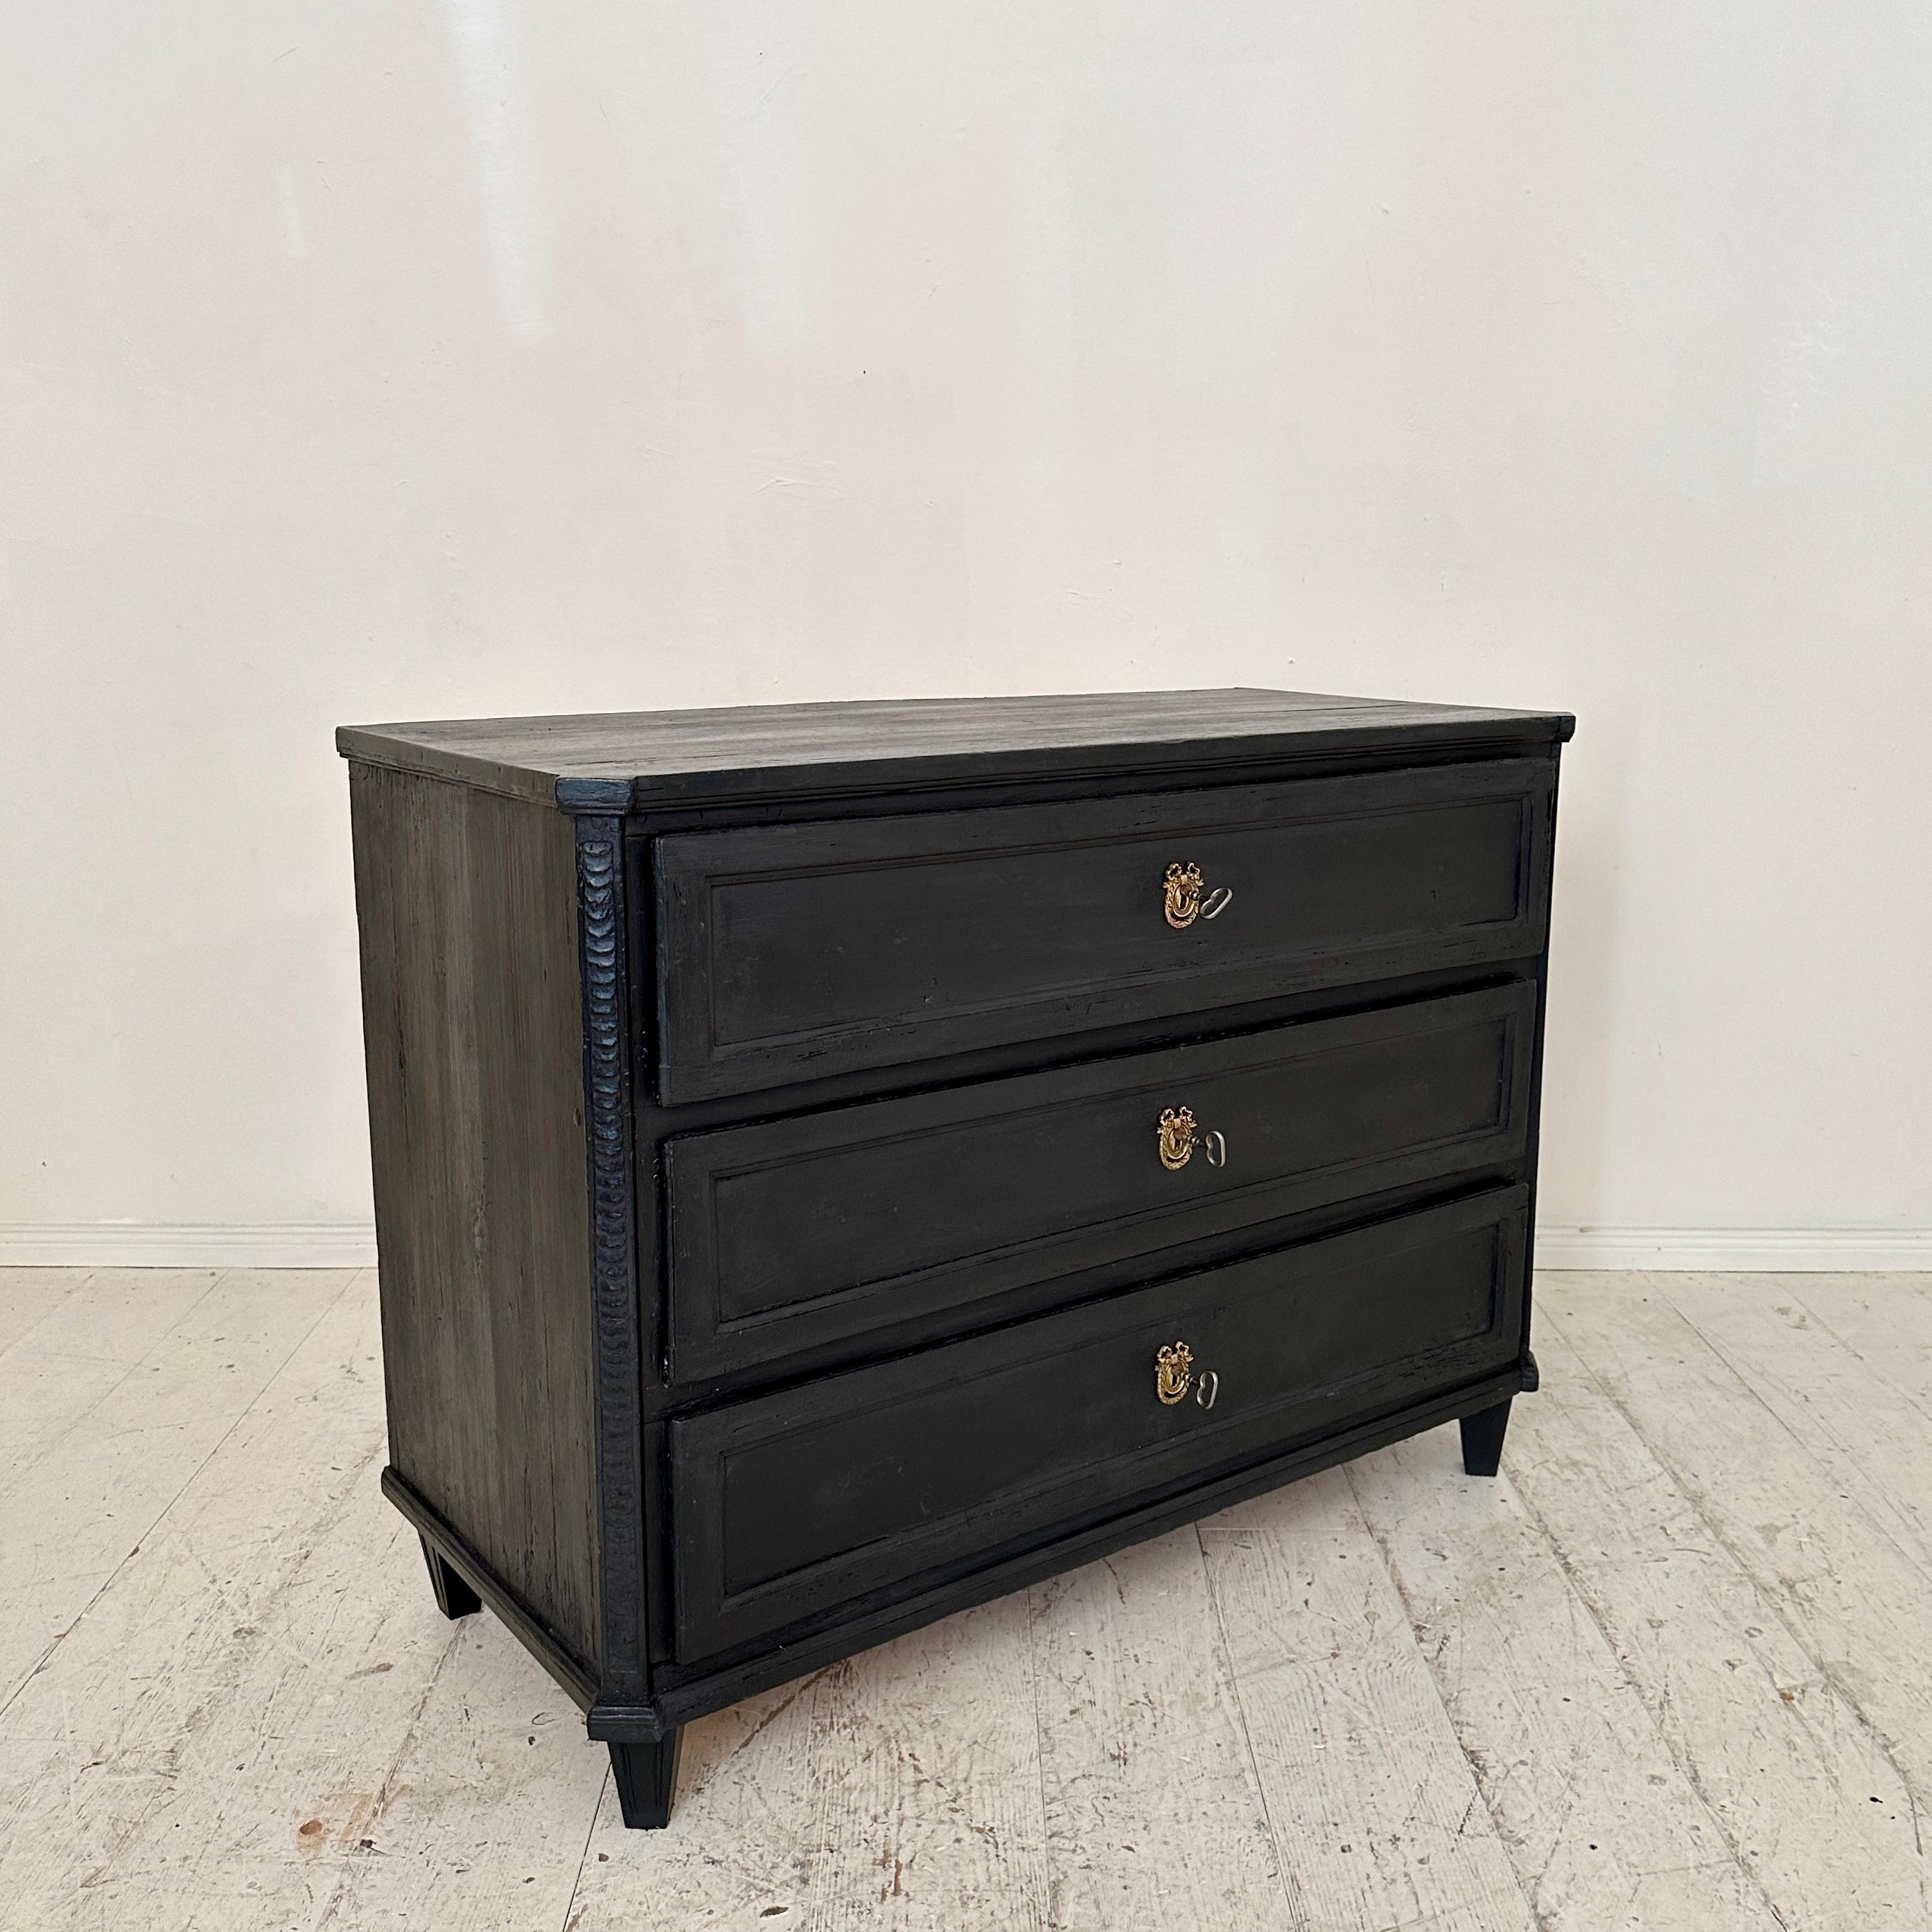 Early 19th Century Black Empire Chest of Drawers with 3 Drawers, around 1800 For Sale 5